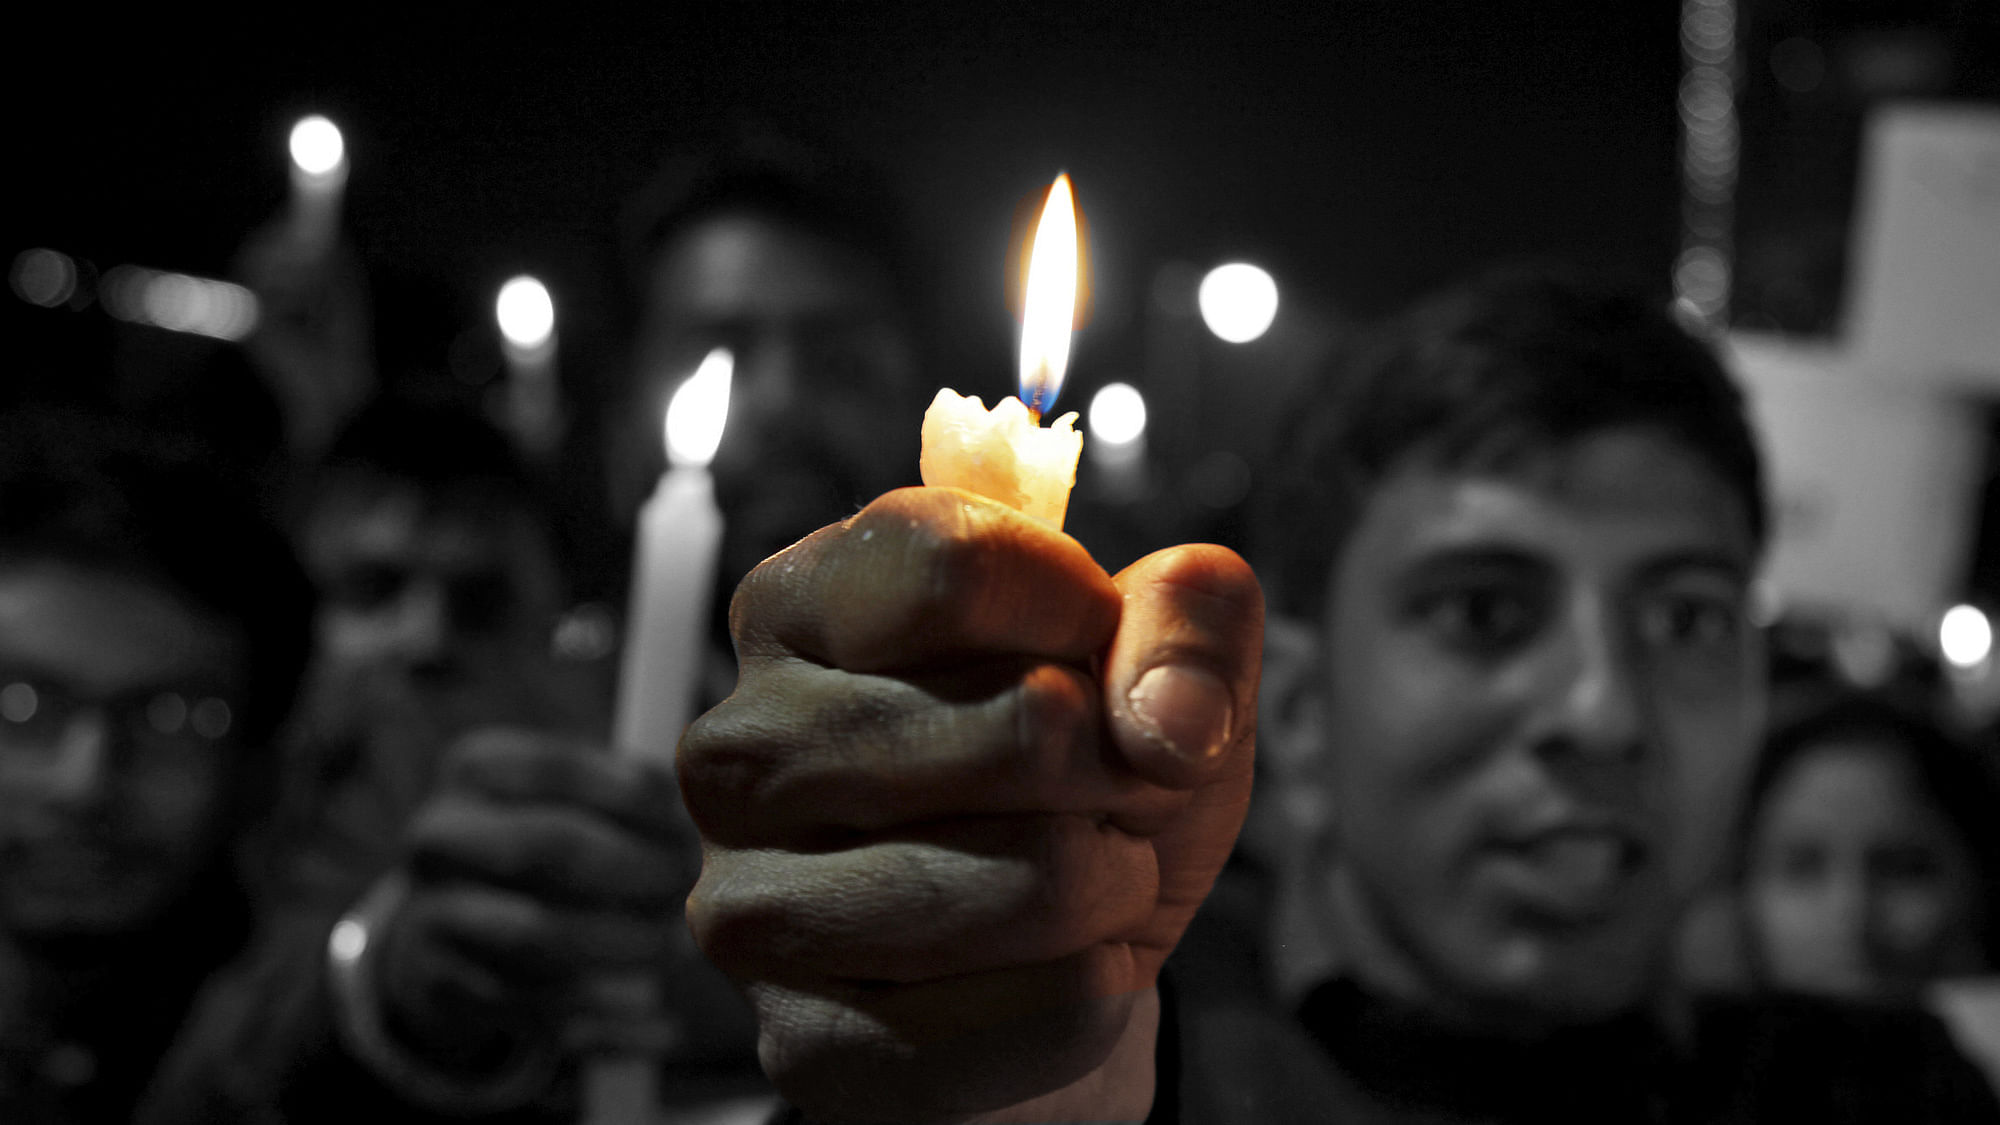 Students take part in a candlelight vigil in Chandigarh, for the Indian soldiers killed in Pathankot air base attack. (Photo: Reuters/Altered by <b>The Quint</b>)